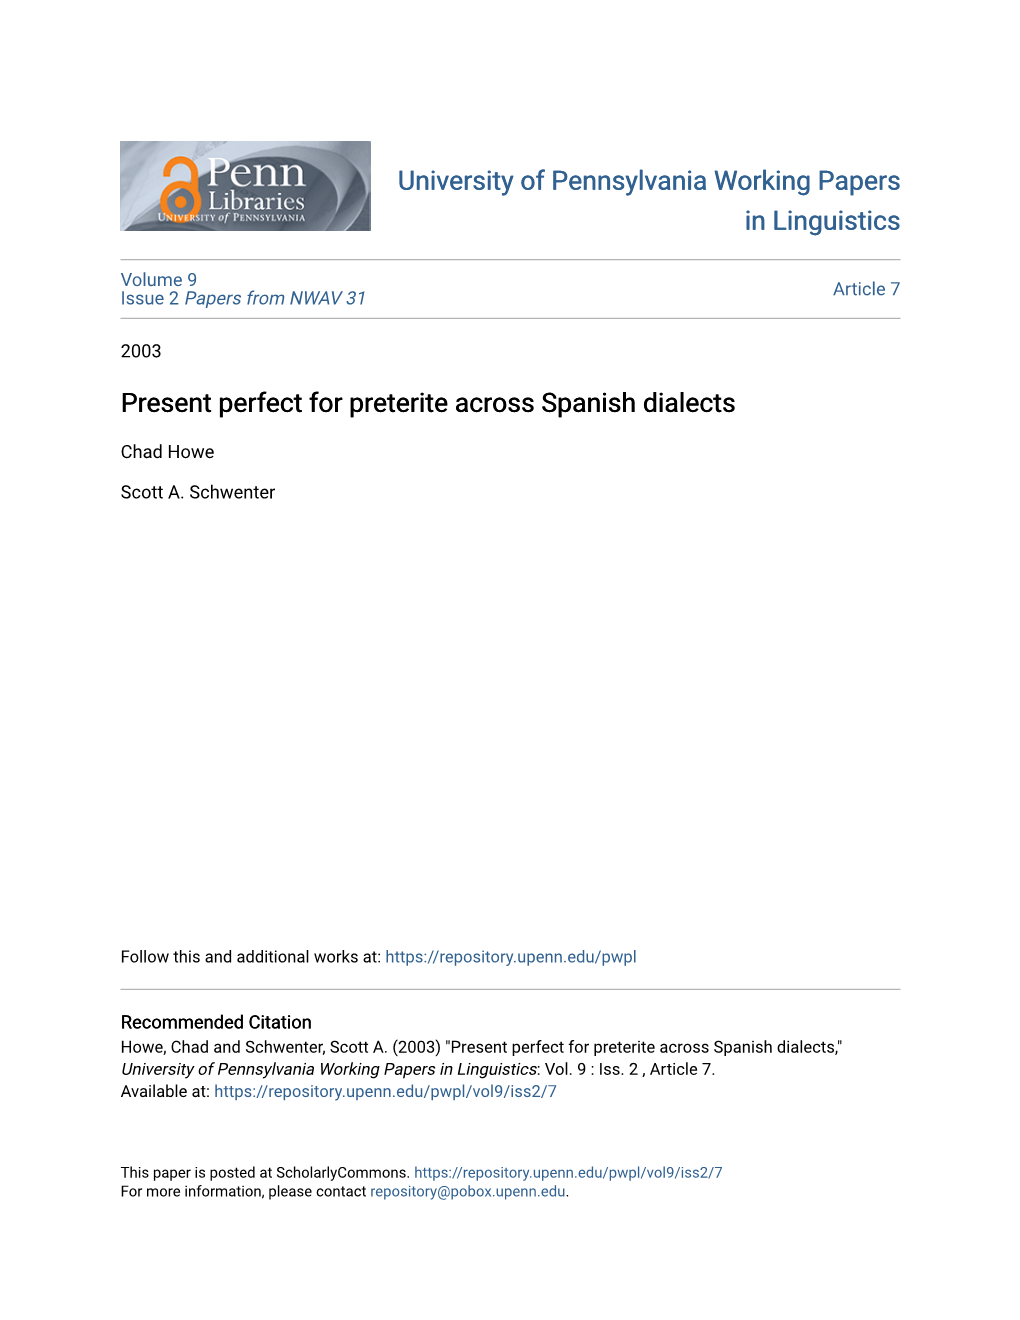 Present Perfect for Preterite Across Spanish Dialects